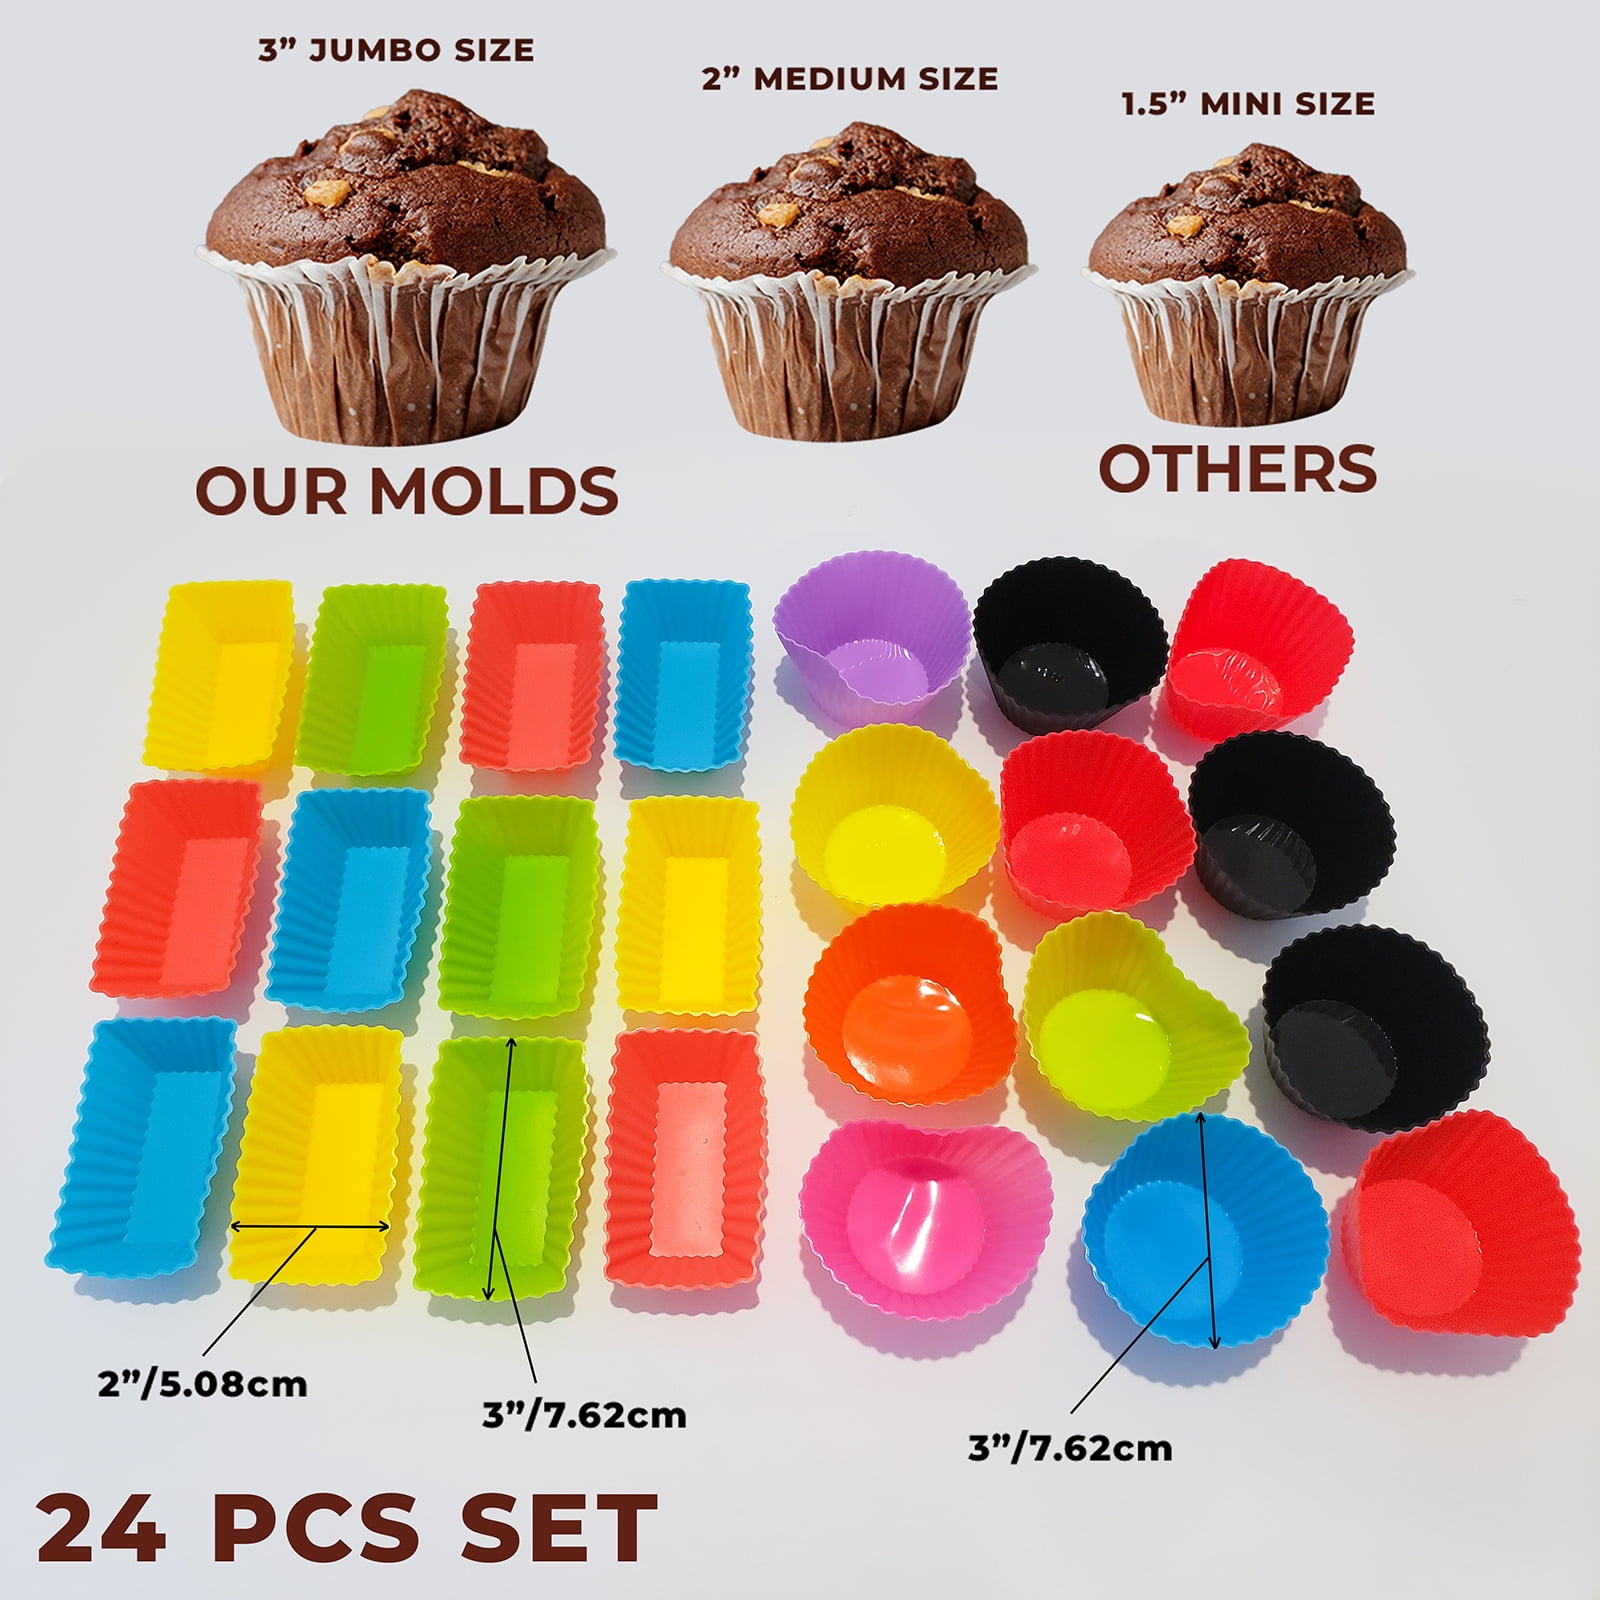  Aichoof 3.6 inch Jumbo Muffin Pan 6 Cups, Silicone Muffin Pan  Set of 2 Gray, Muffin Pans For Baking Nonstick, Muffin Tin BPA Free, Large  Muffin Pan Dishwasher Safe: Home & Kitchen